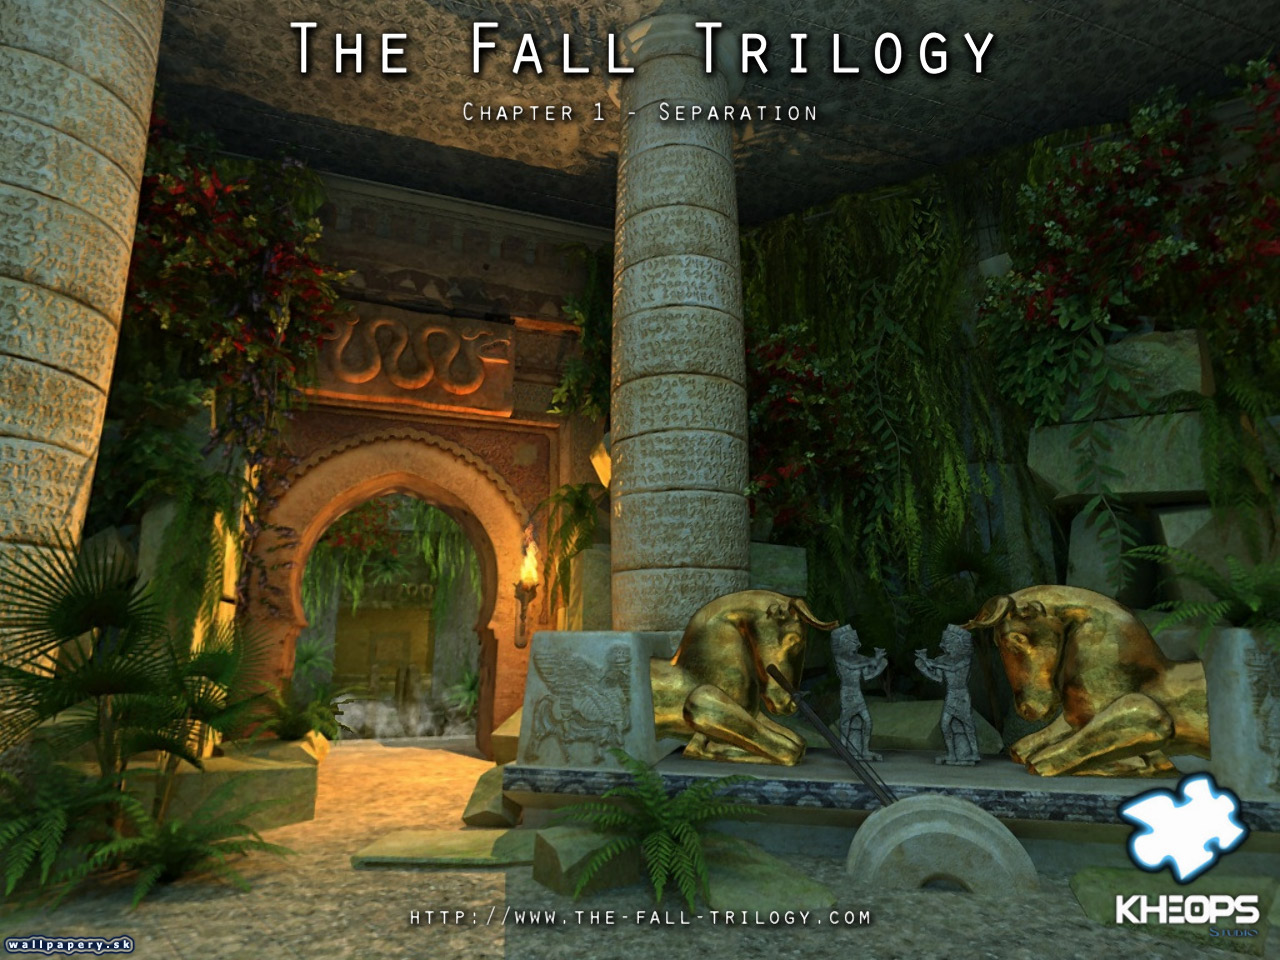 The Fall Trilogy - Chapter 1: Separation - wallpaper 8